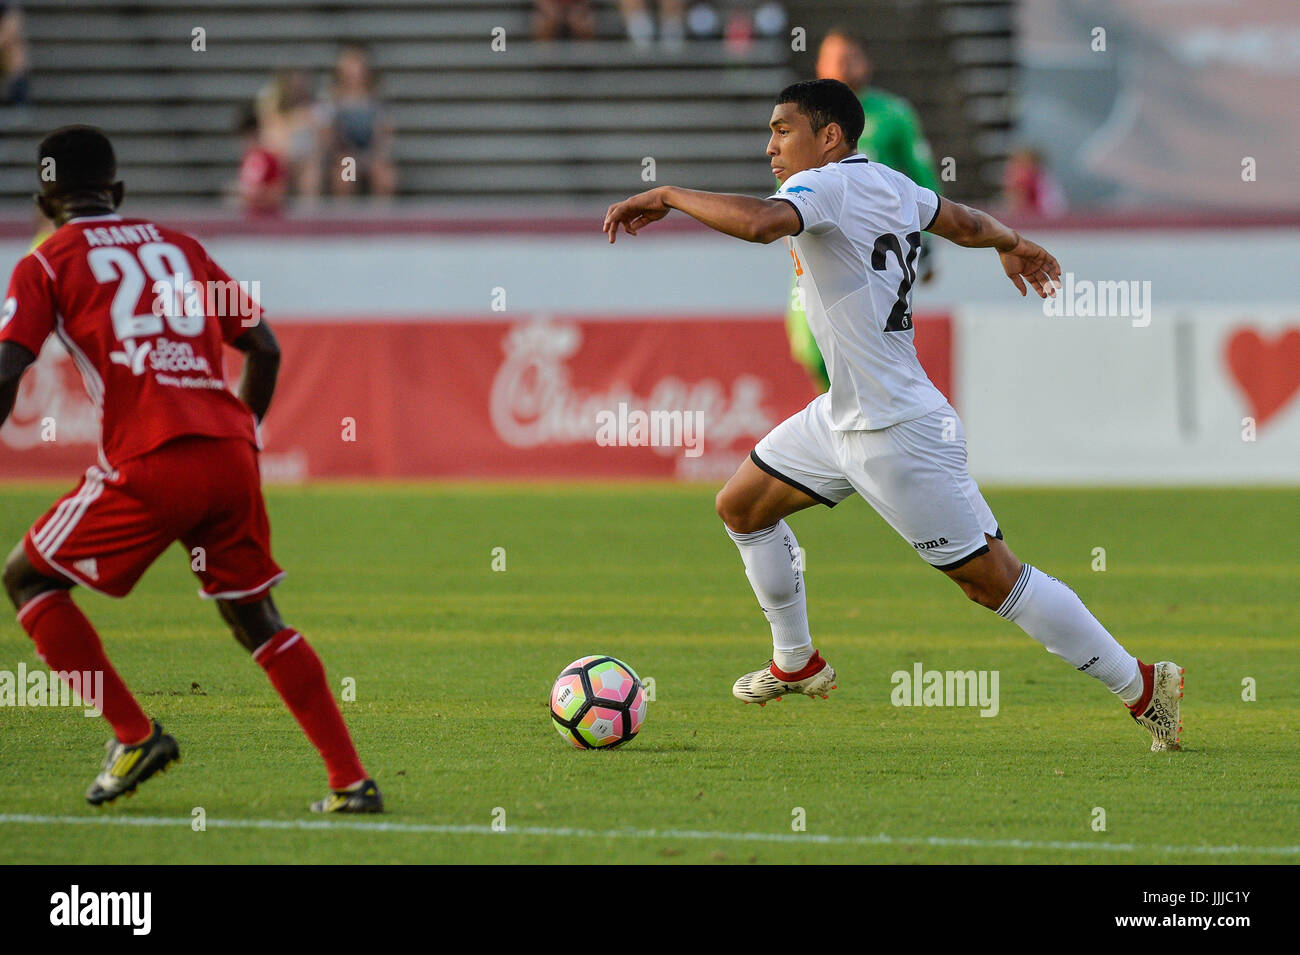 Richmond, Virginia, USA. 19th July, 2017. The Swan's midfielder JEFFERSON MONTERO (20) eyes the defender during the first half of the game held at the City Stadium, Richmond, Virginia. Credit: Amy Sanderson/ZUMA Wire/Alamy Live News Stock Photo